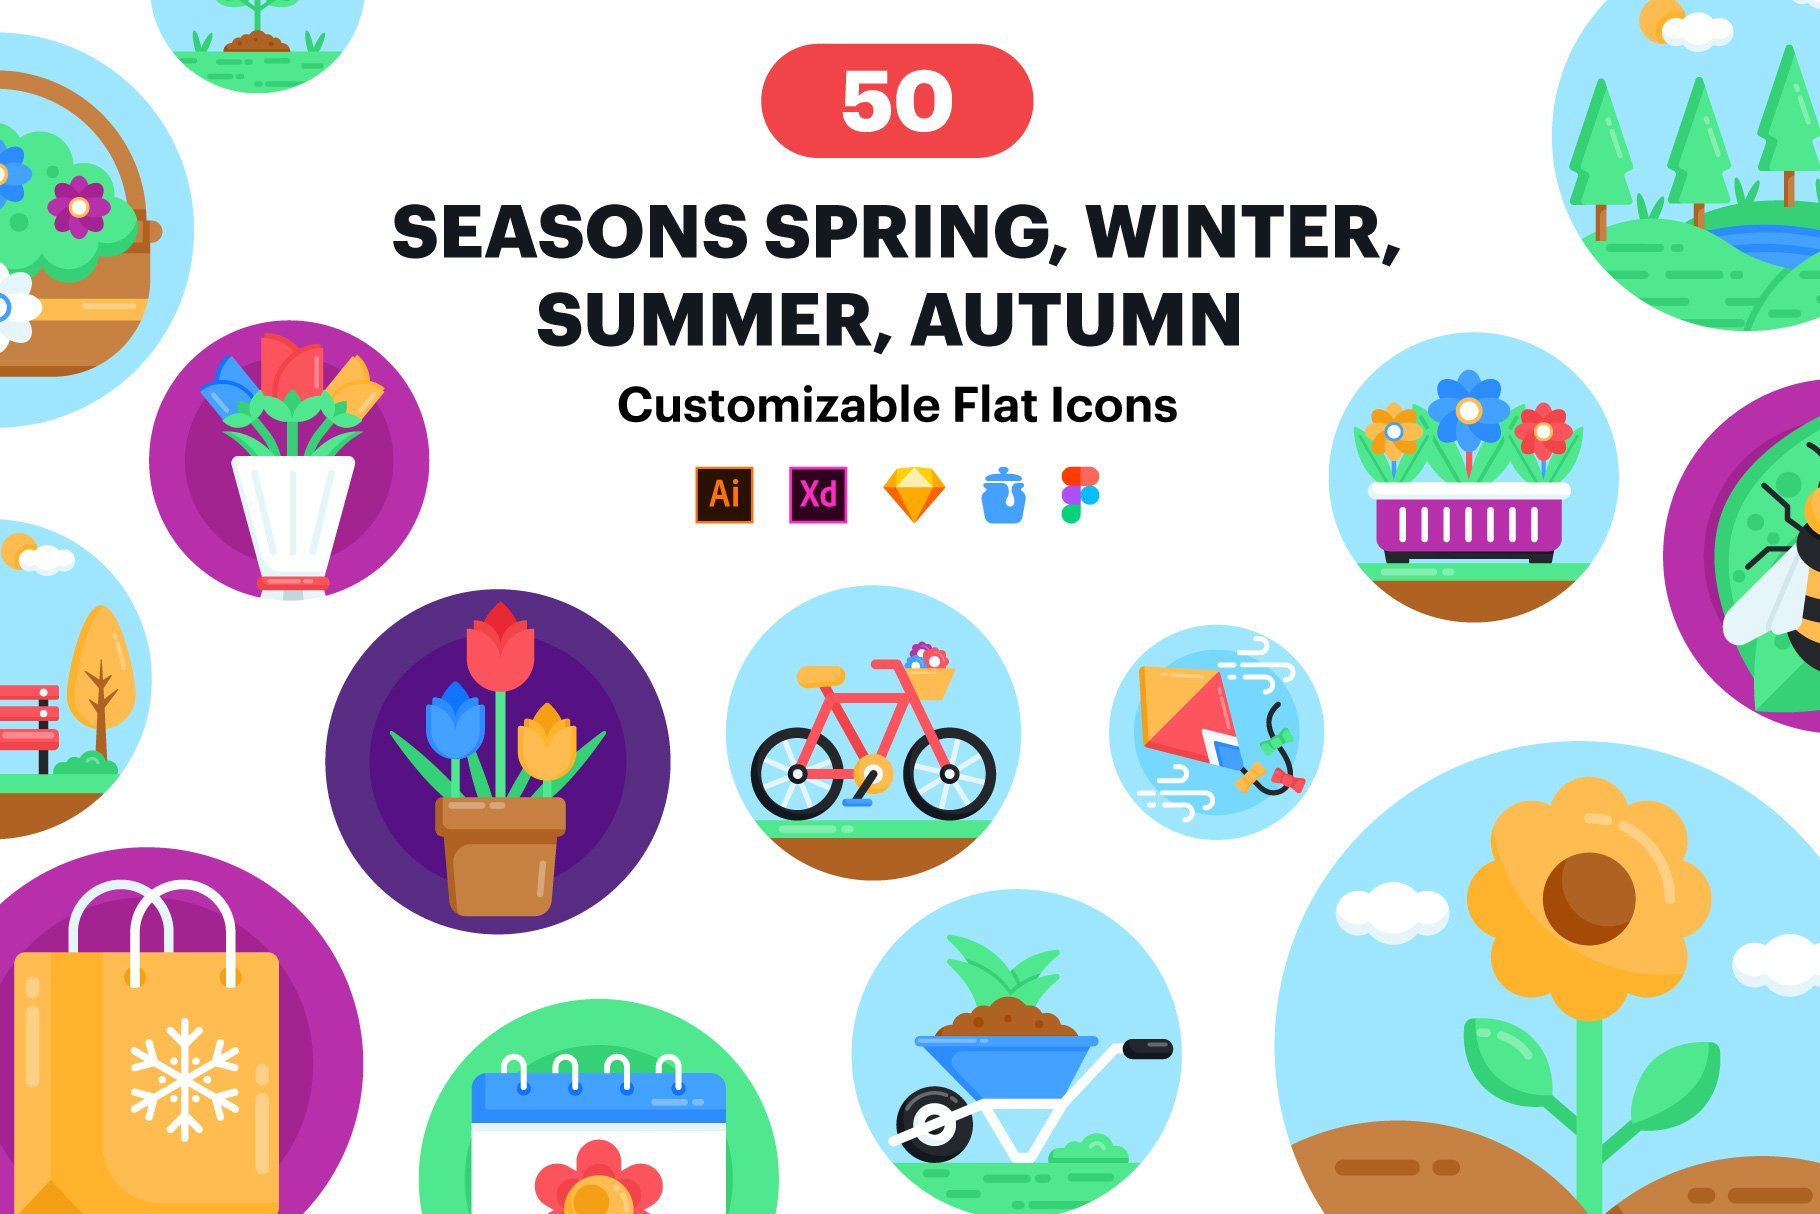 All Season Icons - 50 Vector Icons cover image.